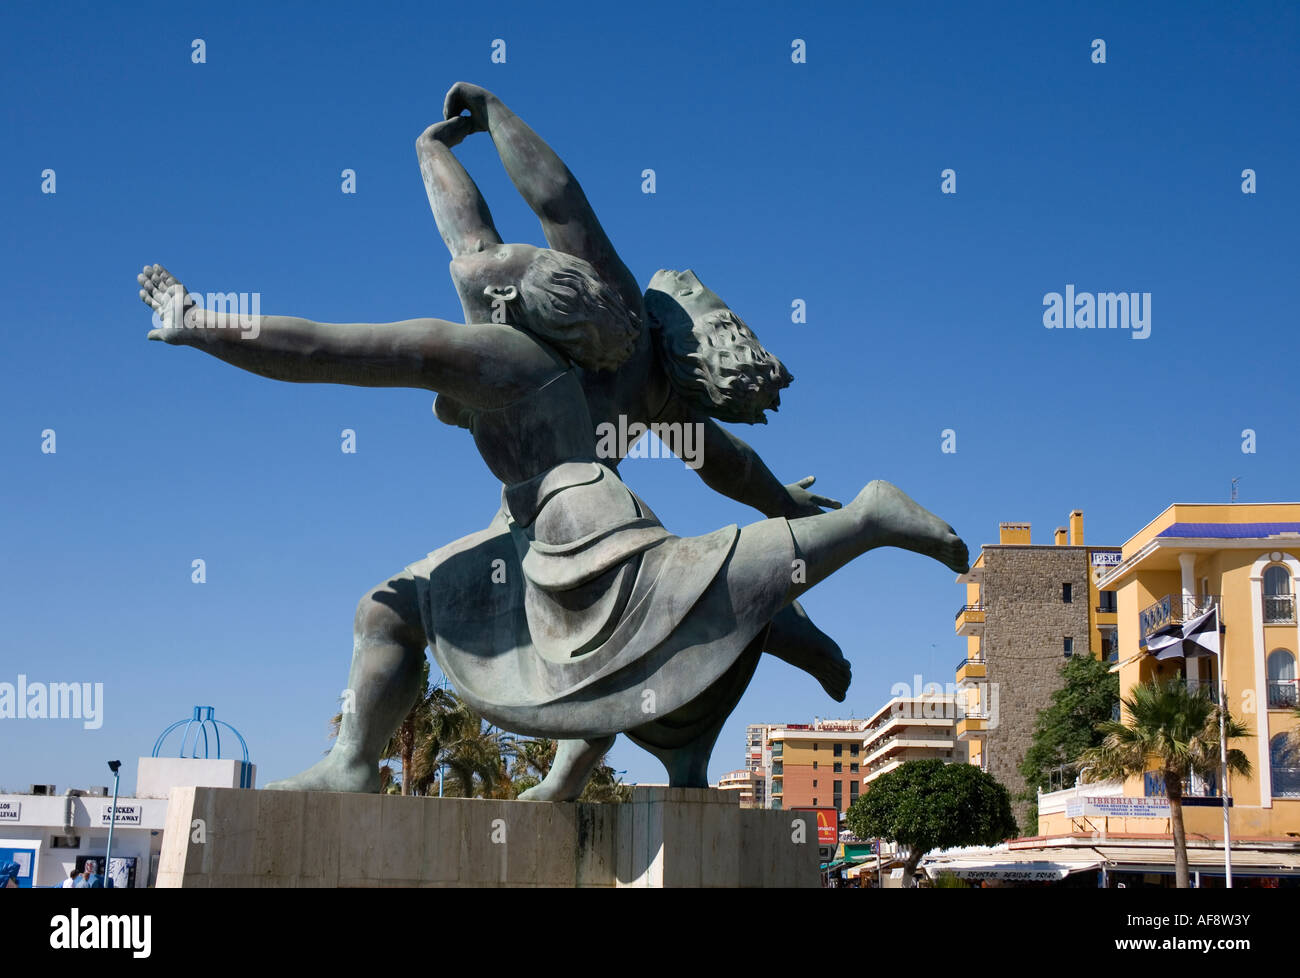 Torremolinos, Costa del Sol, Malaga Province, Andalusia, Spain. Statue based on the painting by Pablo Picasso entitled Two Women Running on the Beach Stock Photo